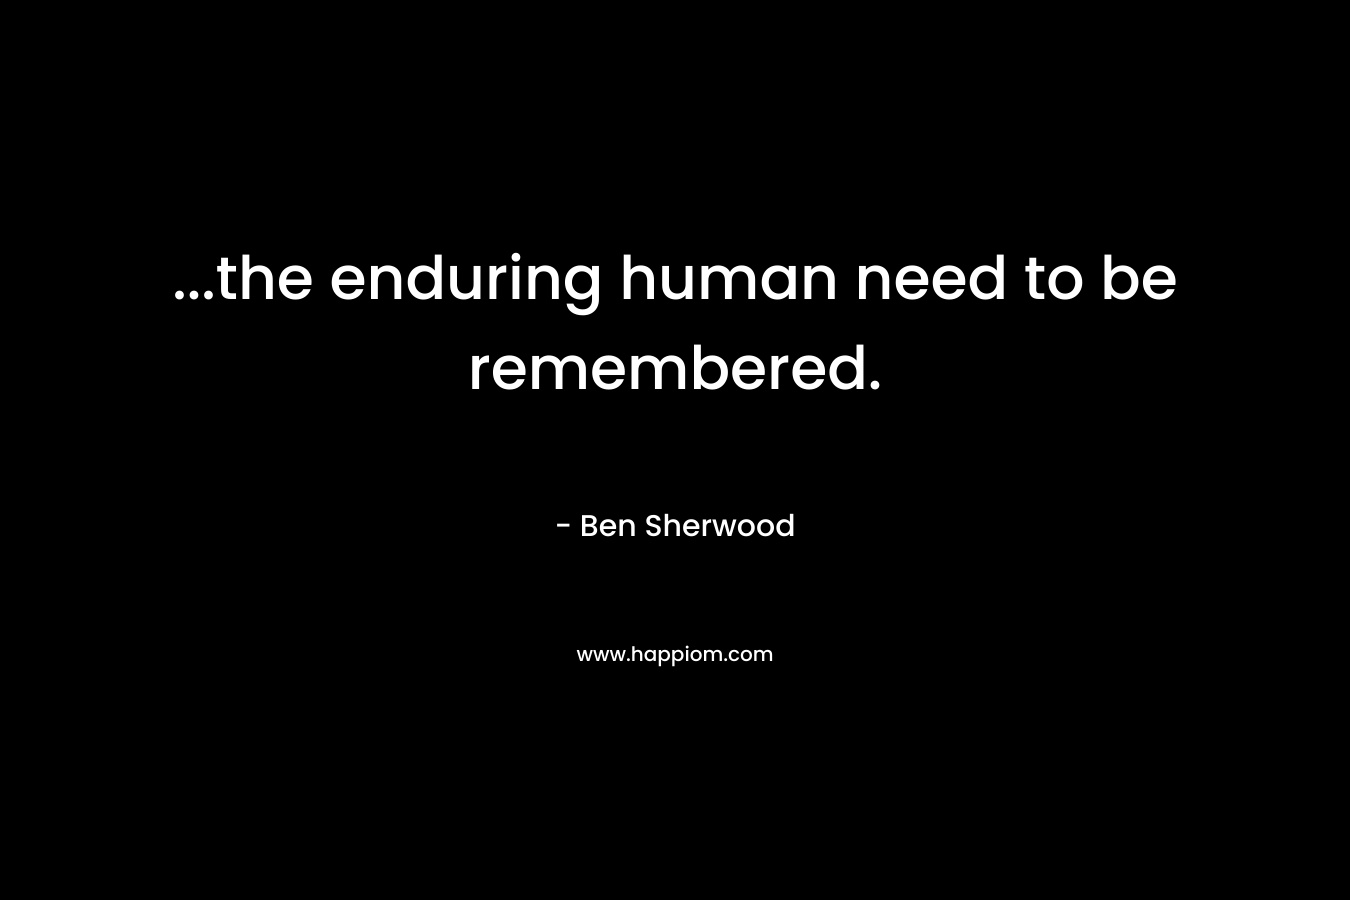 ...the enduring human need to be remembered.